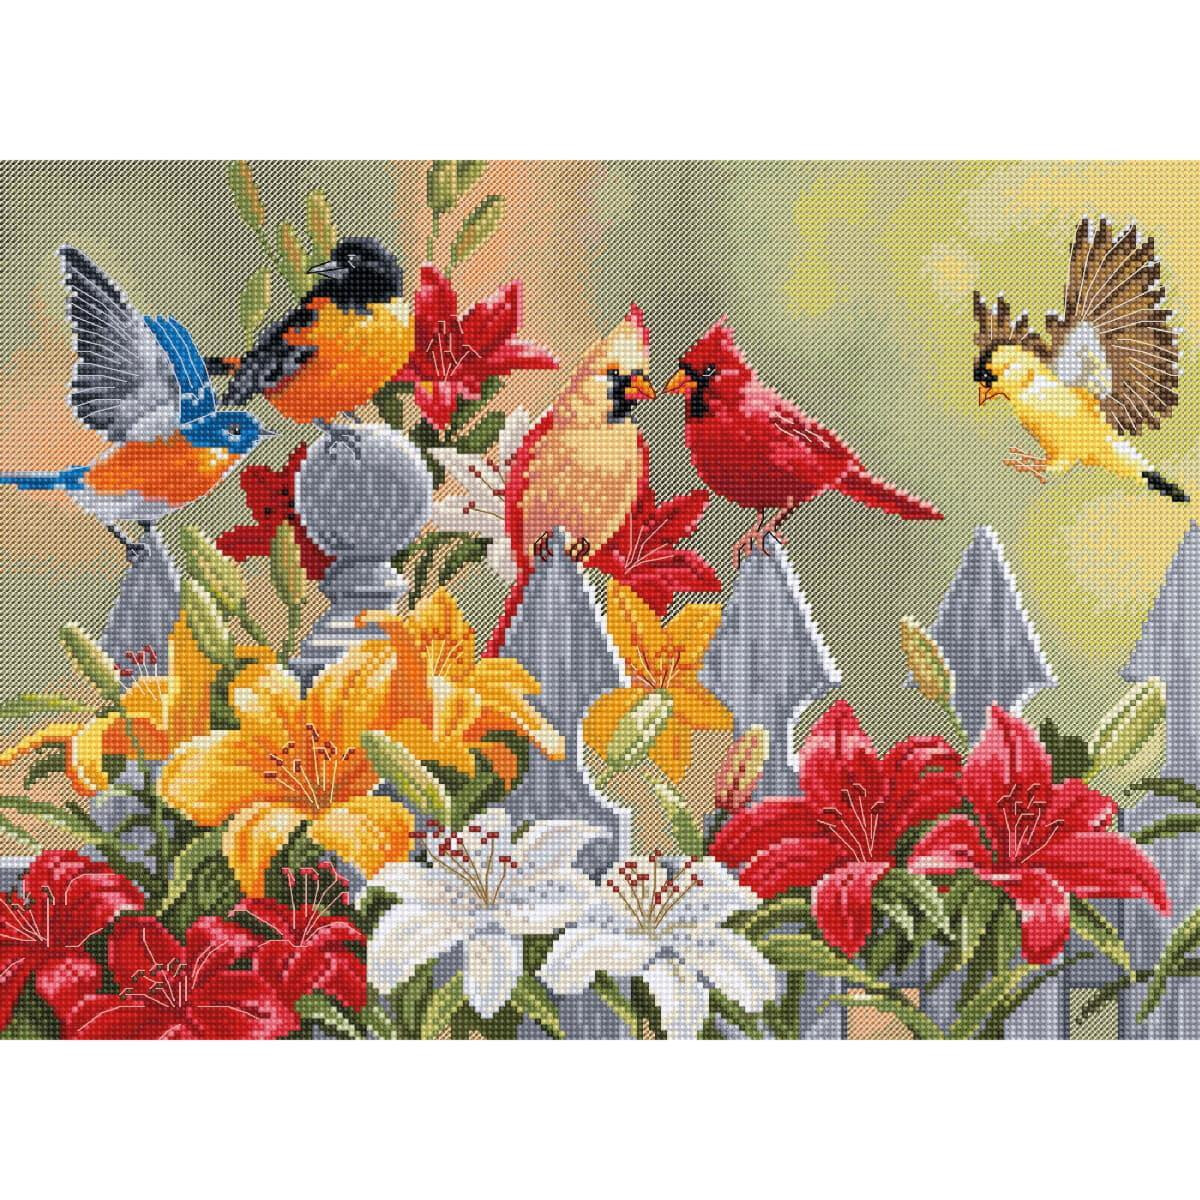 A group of colorful birds, including red cardinals and a...